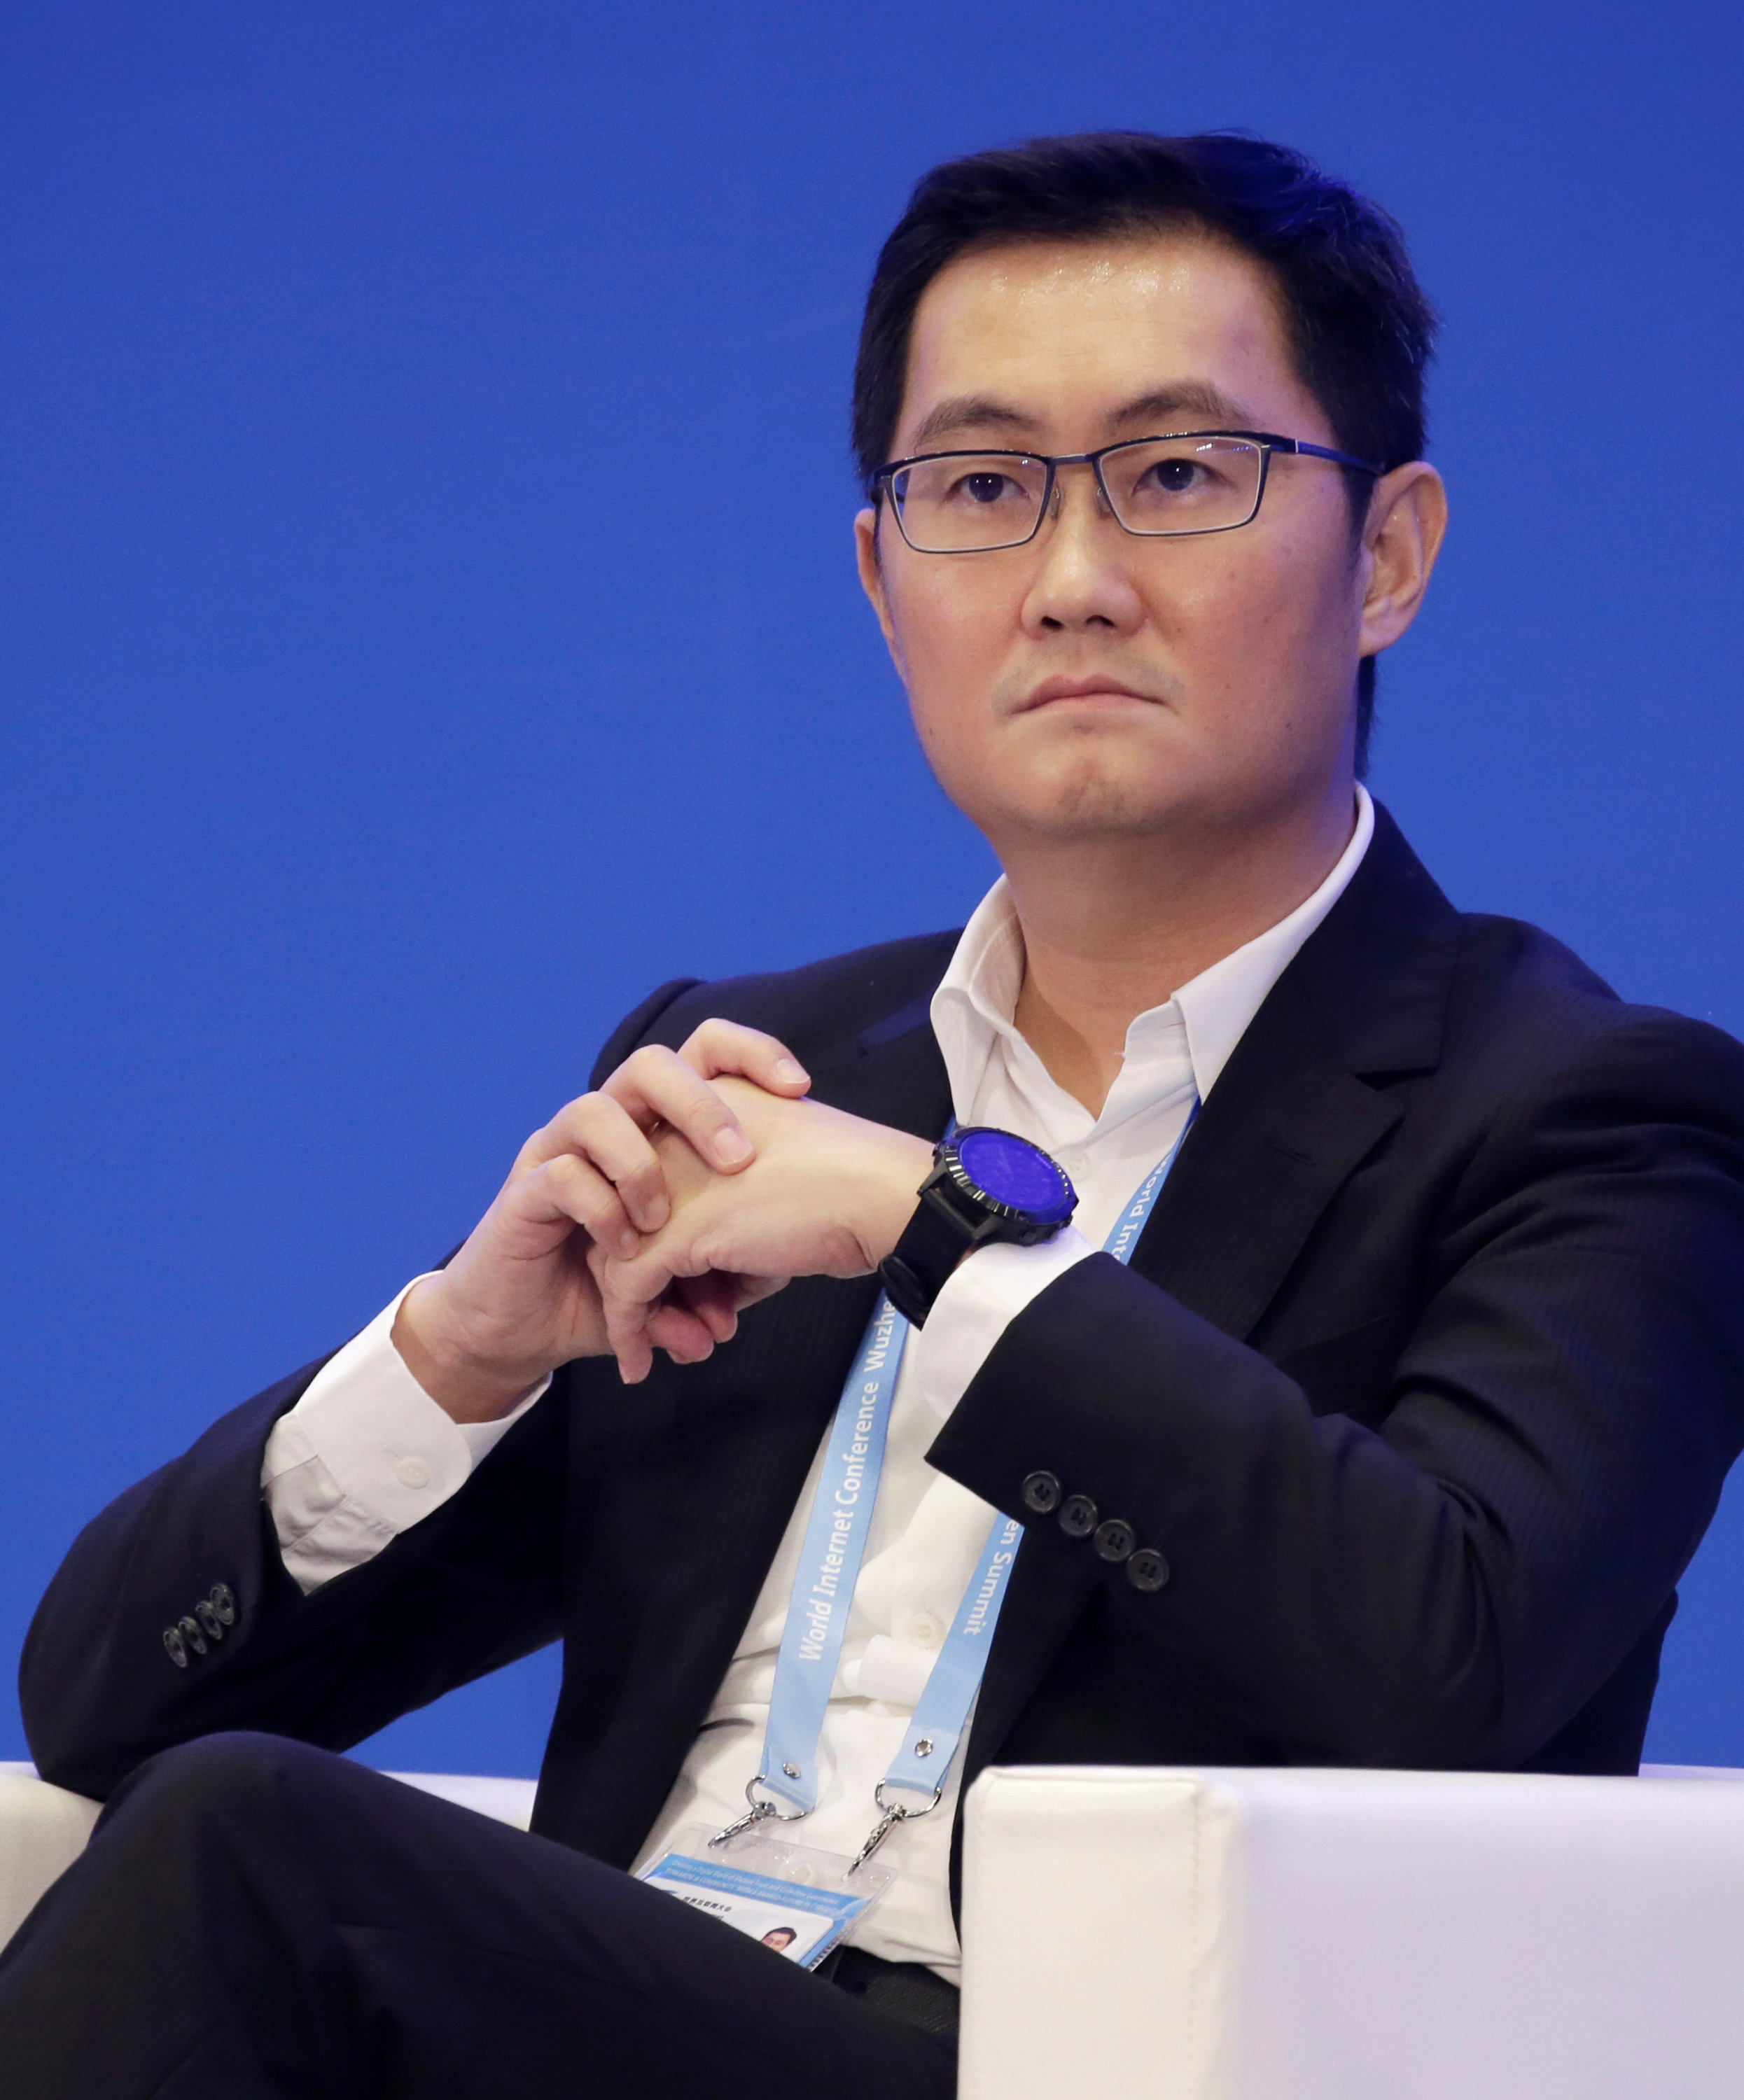 Tencent Holdings CEO Pony Ma wants to develop AI tech that promotes human well-being. Photo: Reuters  